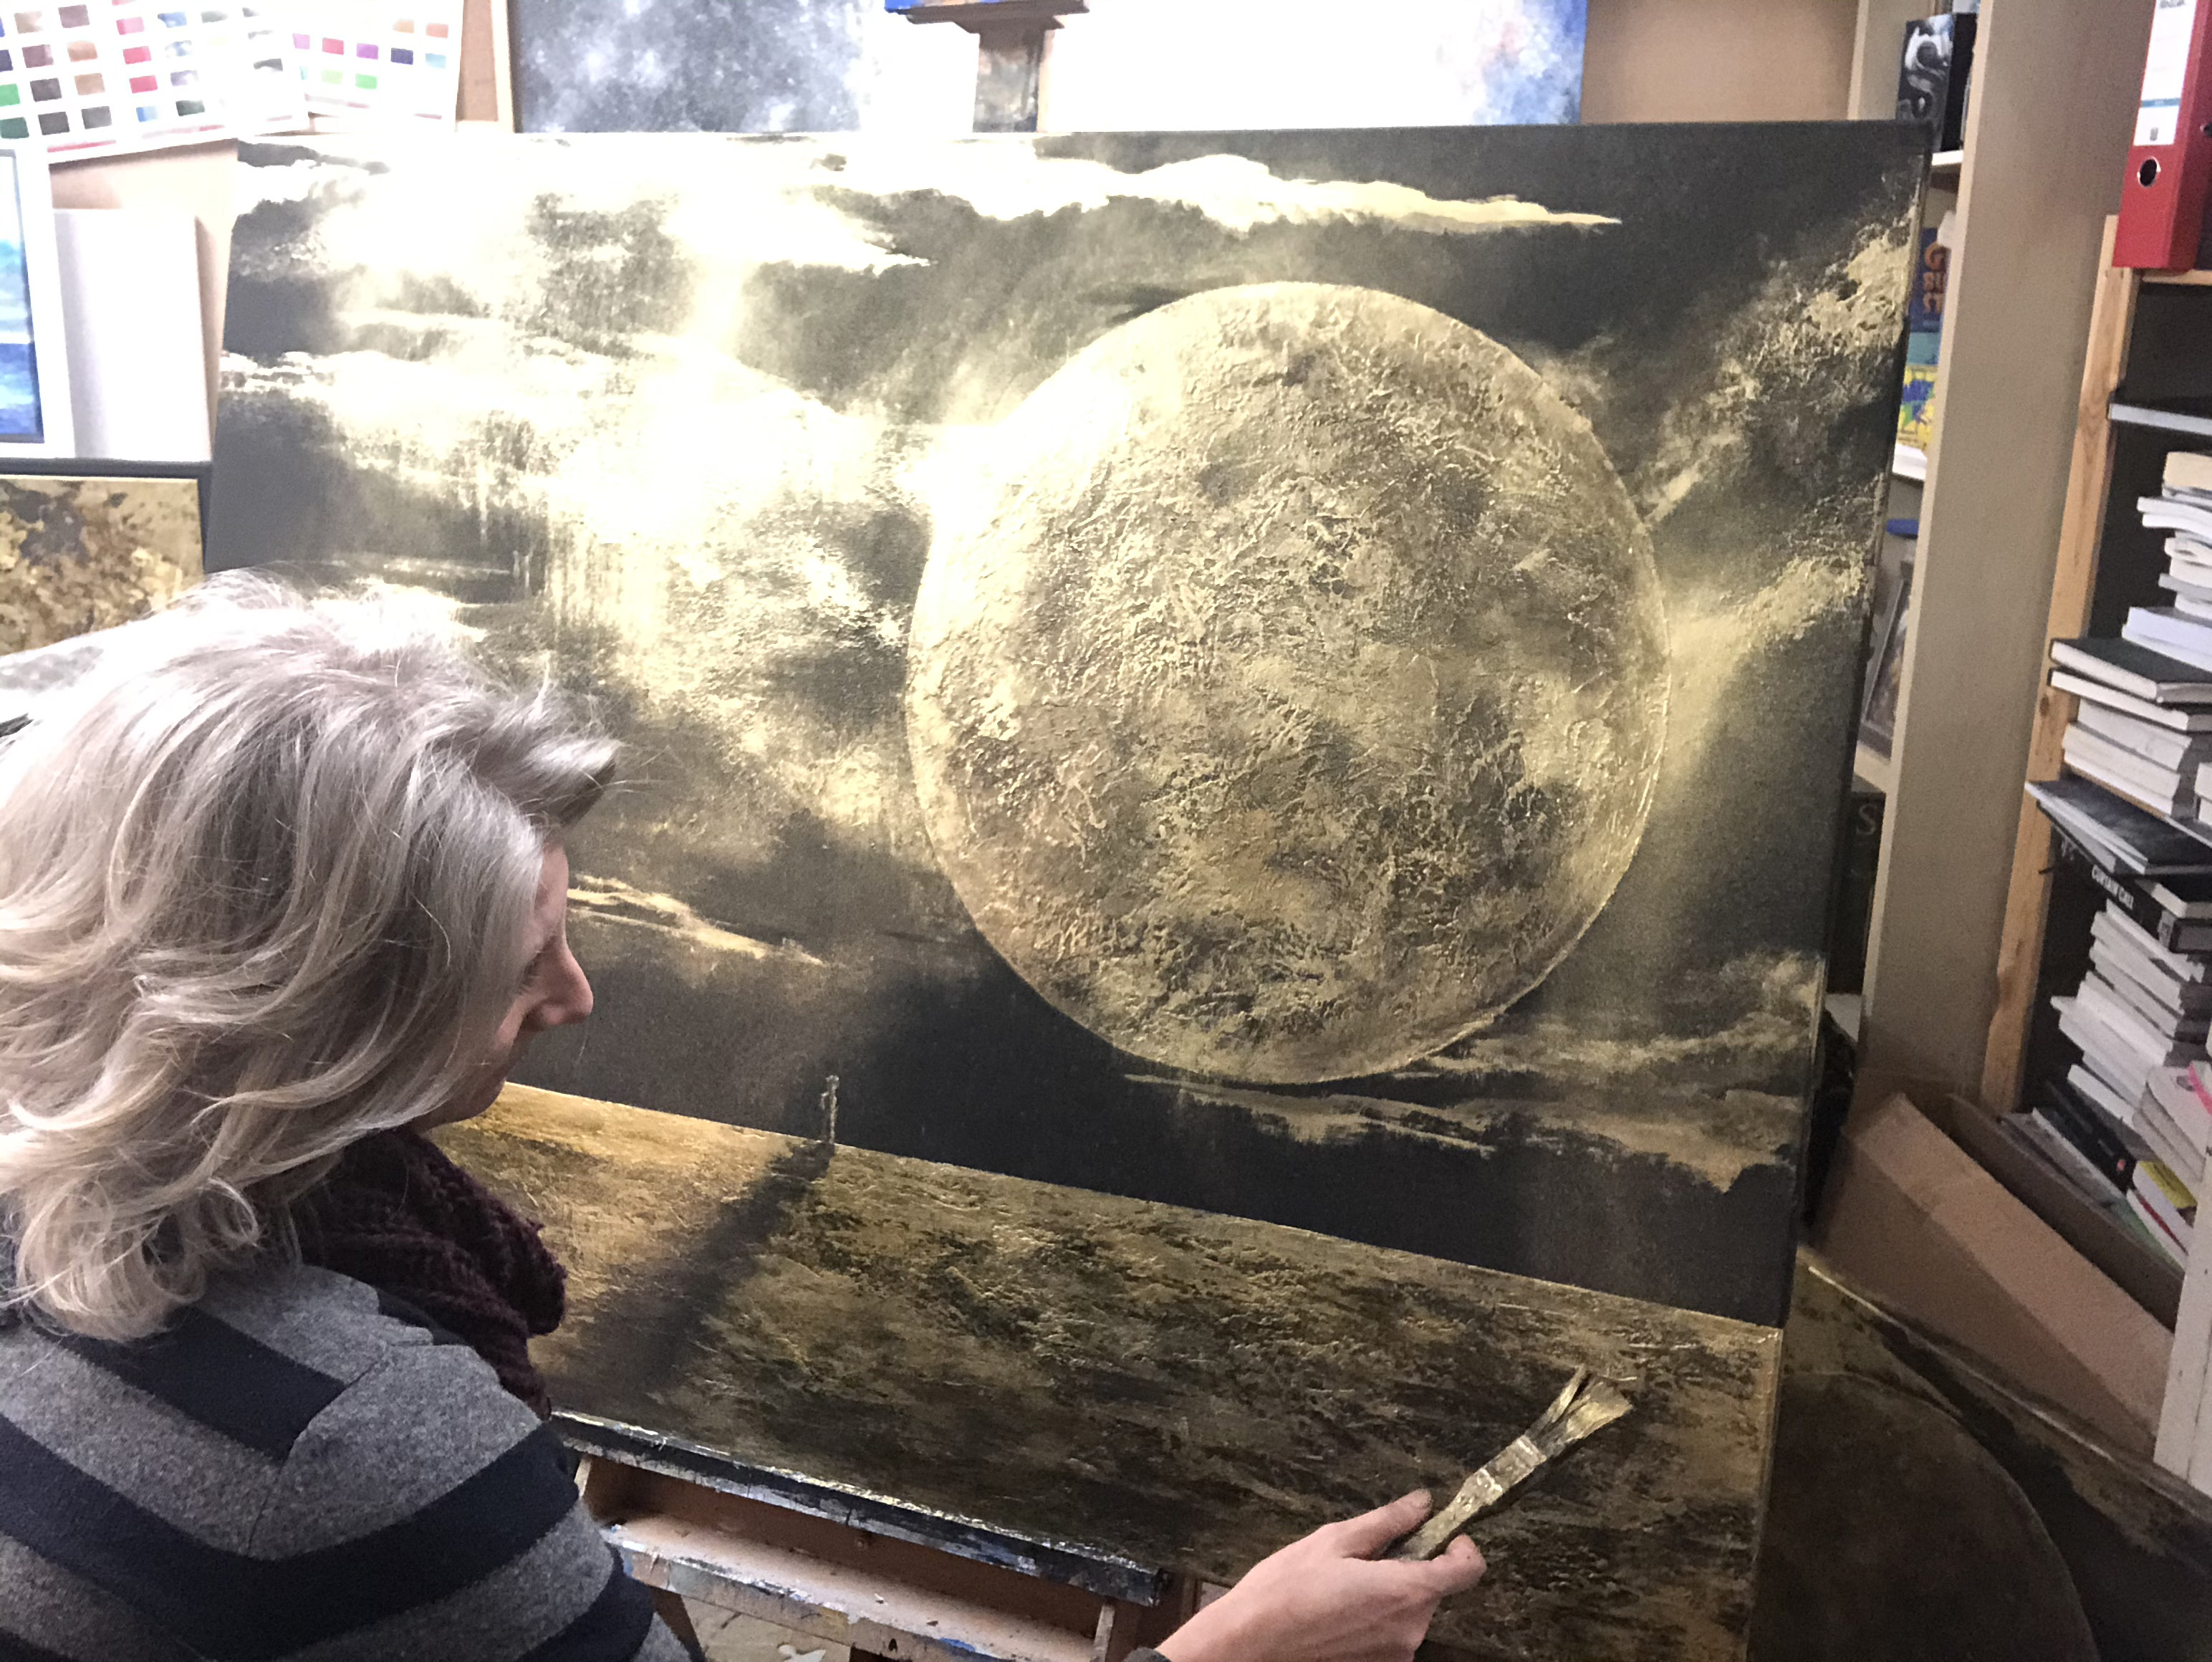 The article's author Roberta Volpe painting a picture